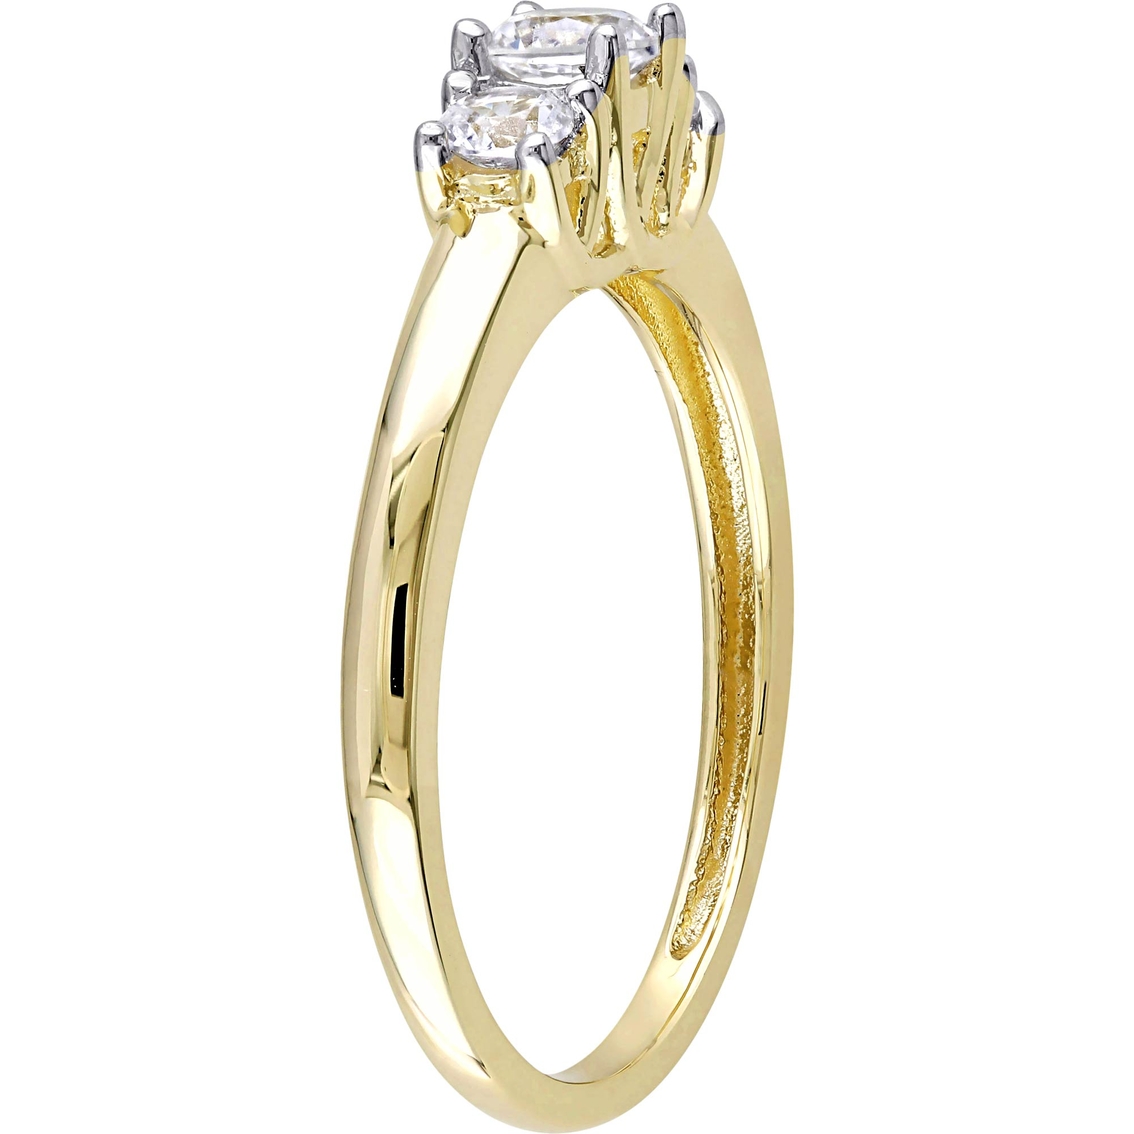 Sofia B. 10K Yellow Gold Lab Created White Sapphire 3 Stone Engagement Ring - Image 3 of 4